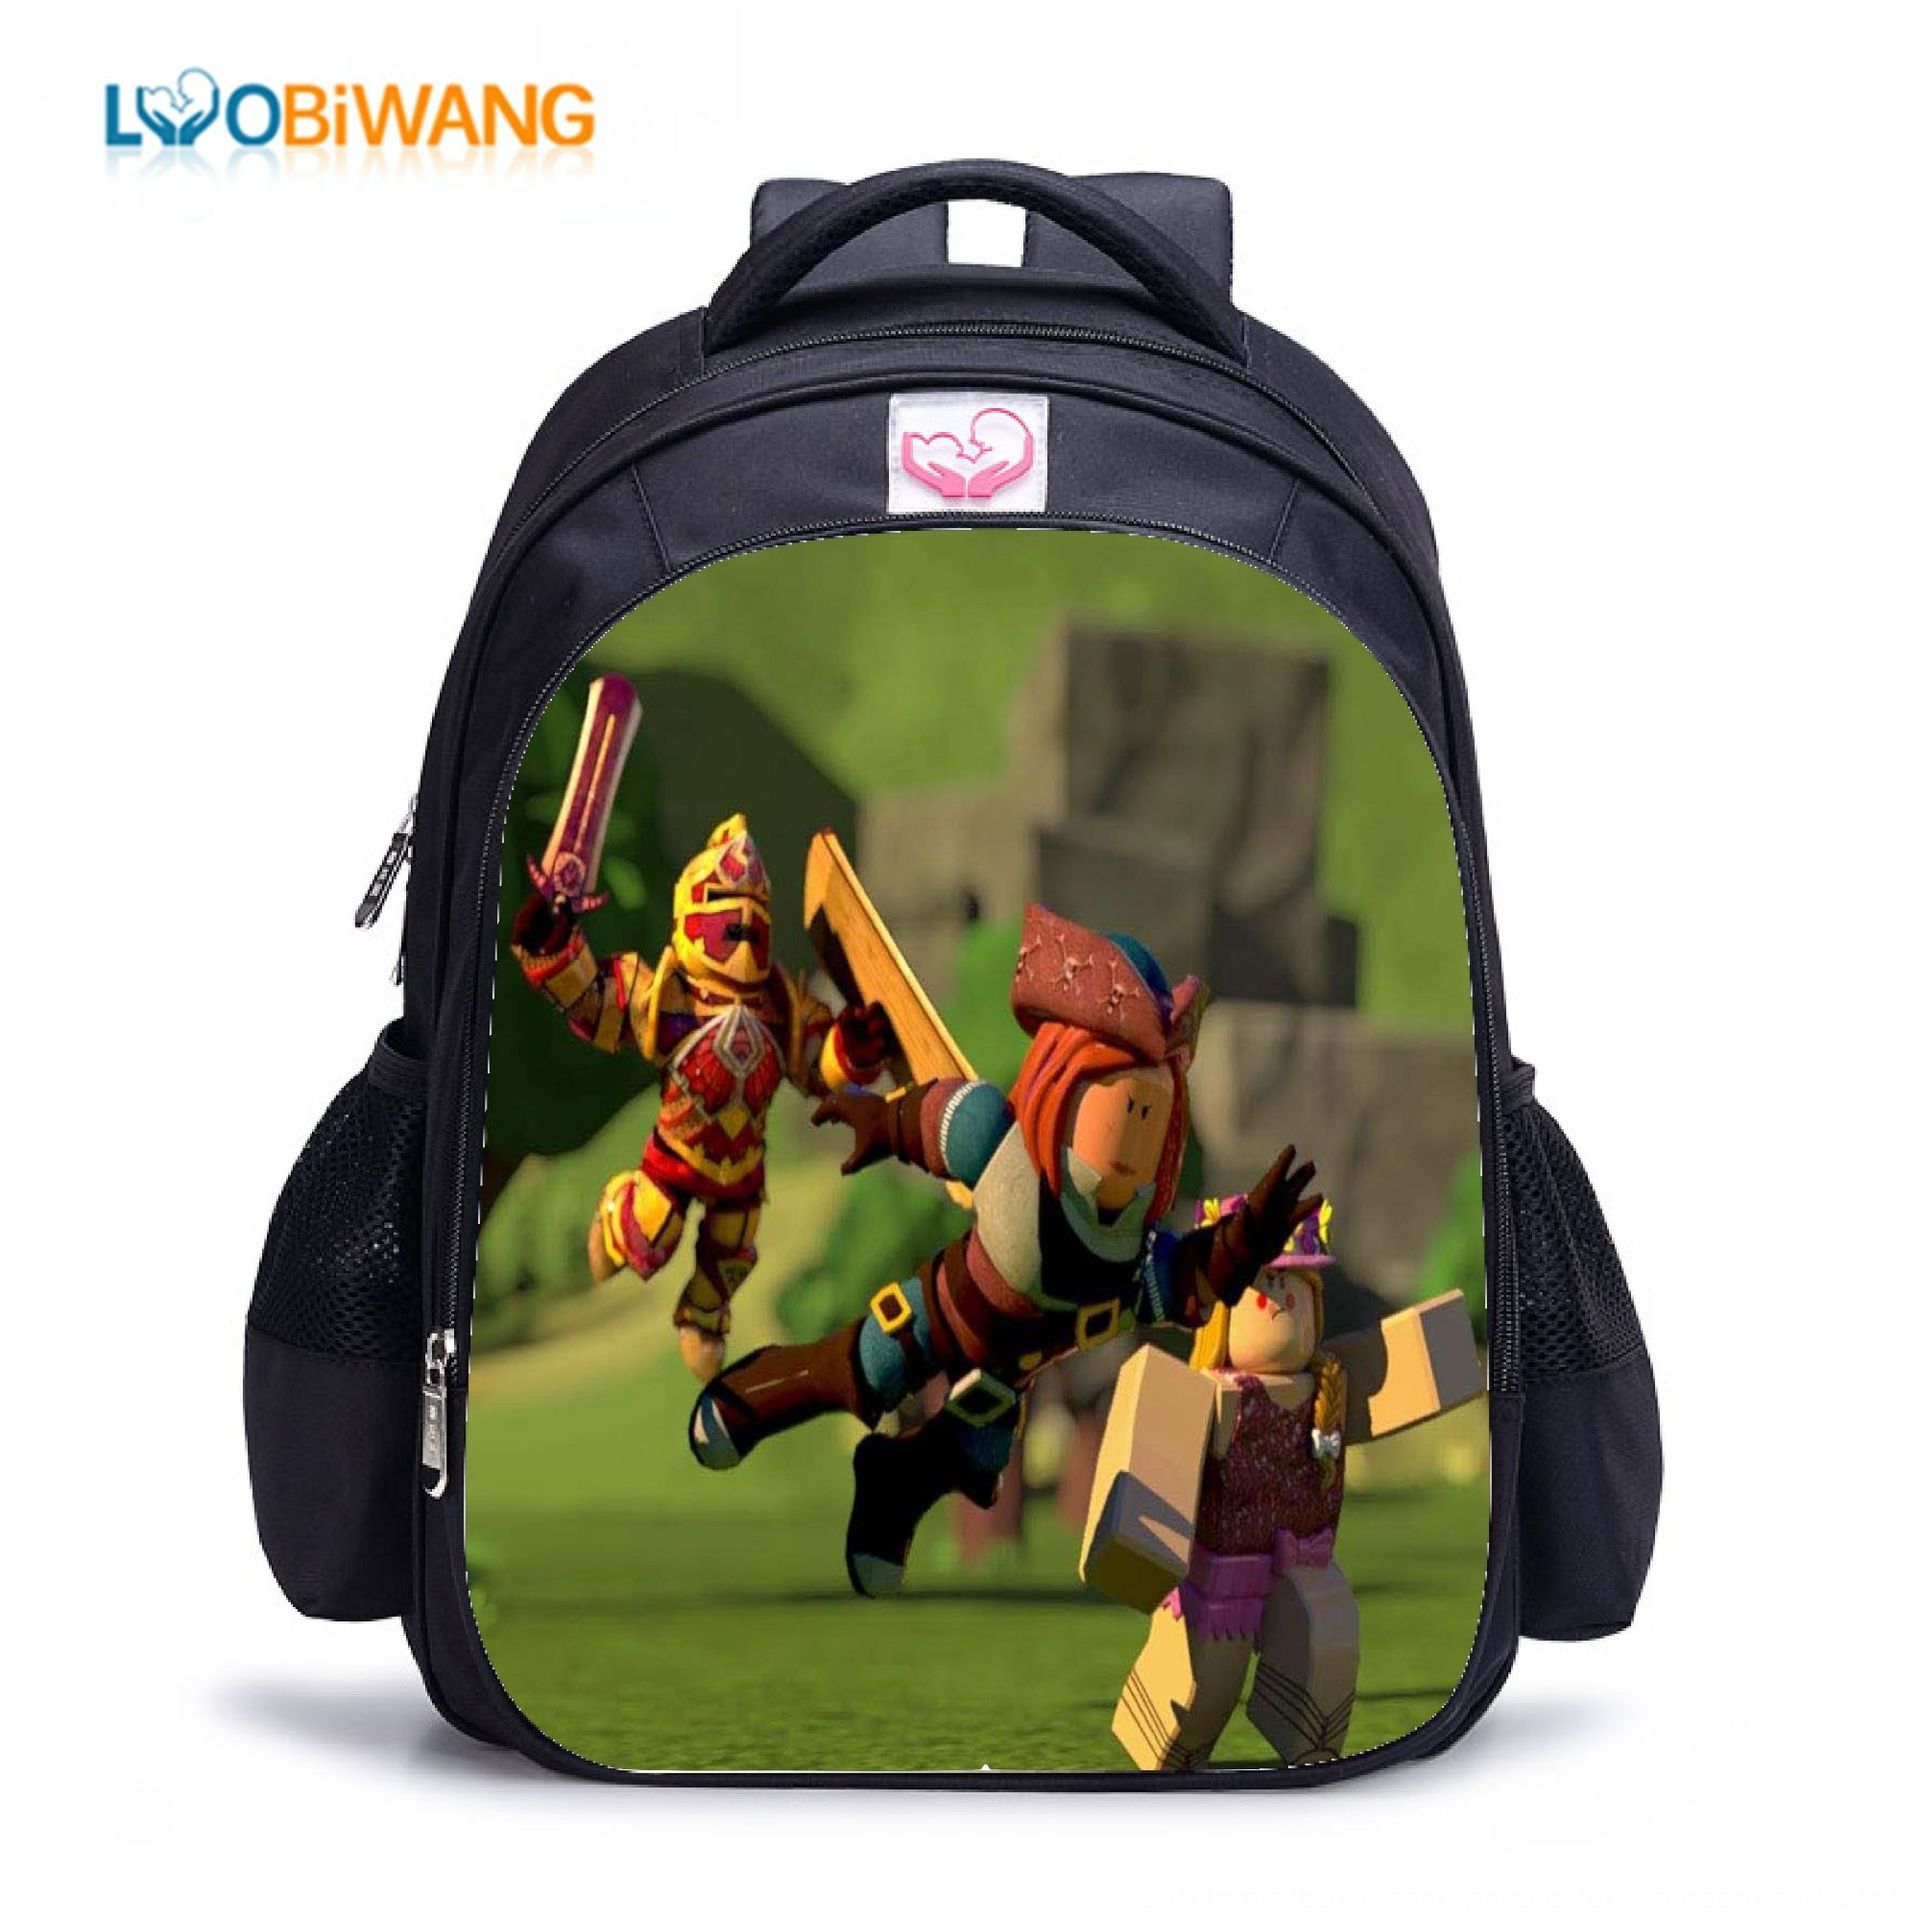 Sk1e0 Childrens Schoolbag Roblox Game Peripheral Is Looking For High Quality Merchants Childrens Schoolbag Roblox Game Peripheral Is Looki Cheap Backpacks For Teens Rucksacks And Backpacks From Gooddayitems 24 37 Dhgate Com - white mini purse roblox